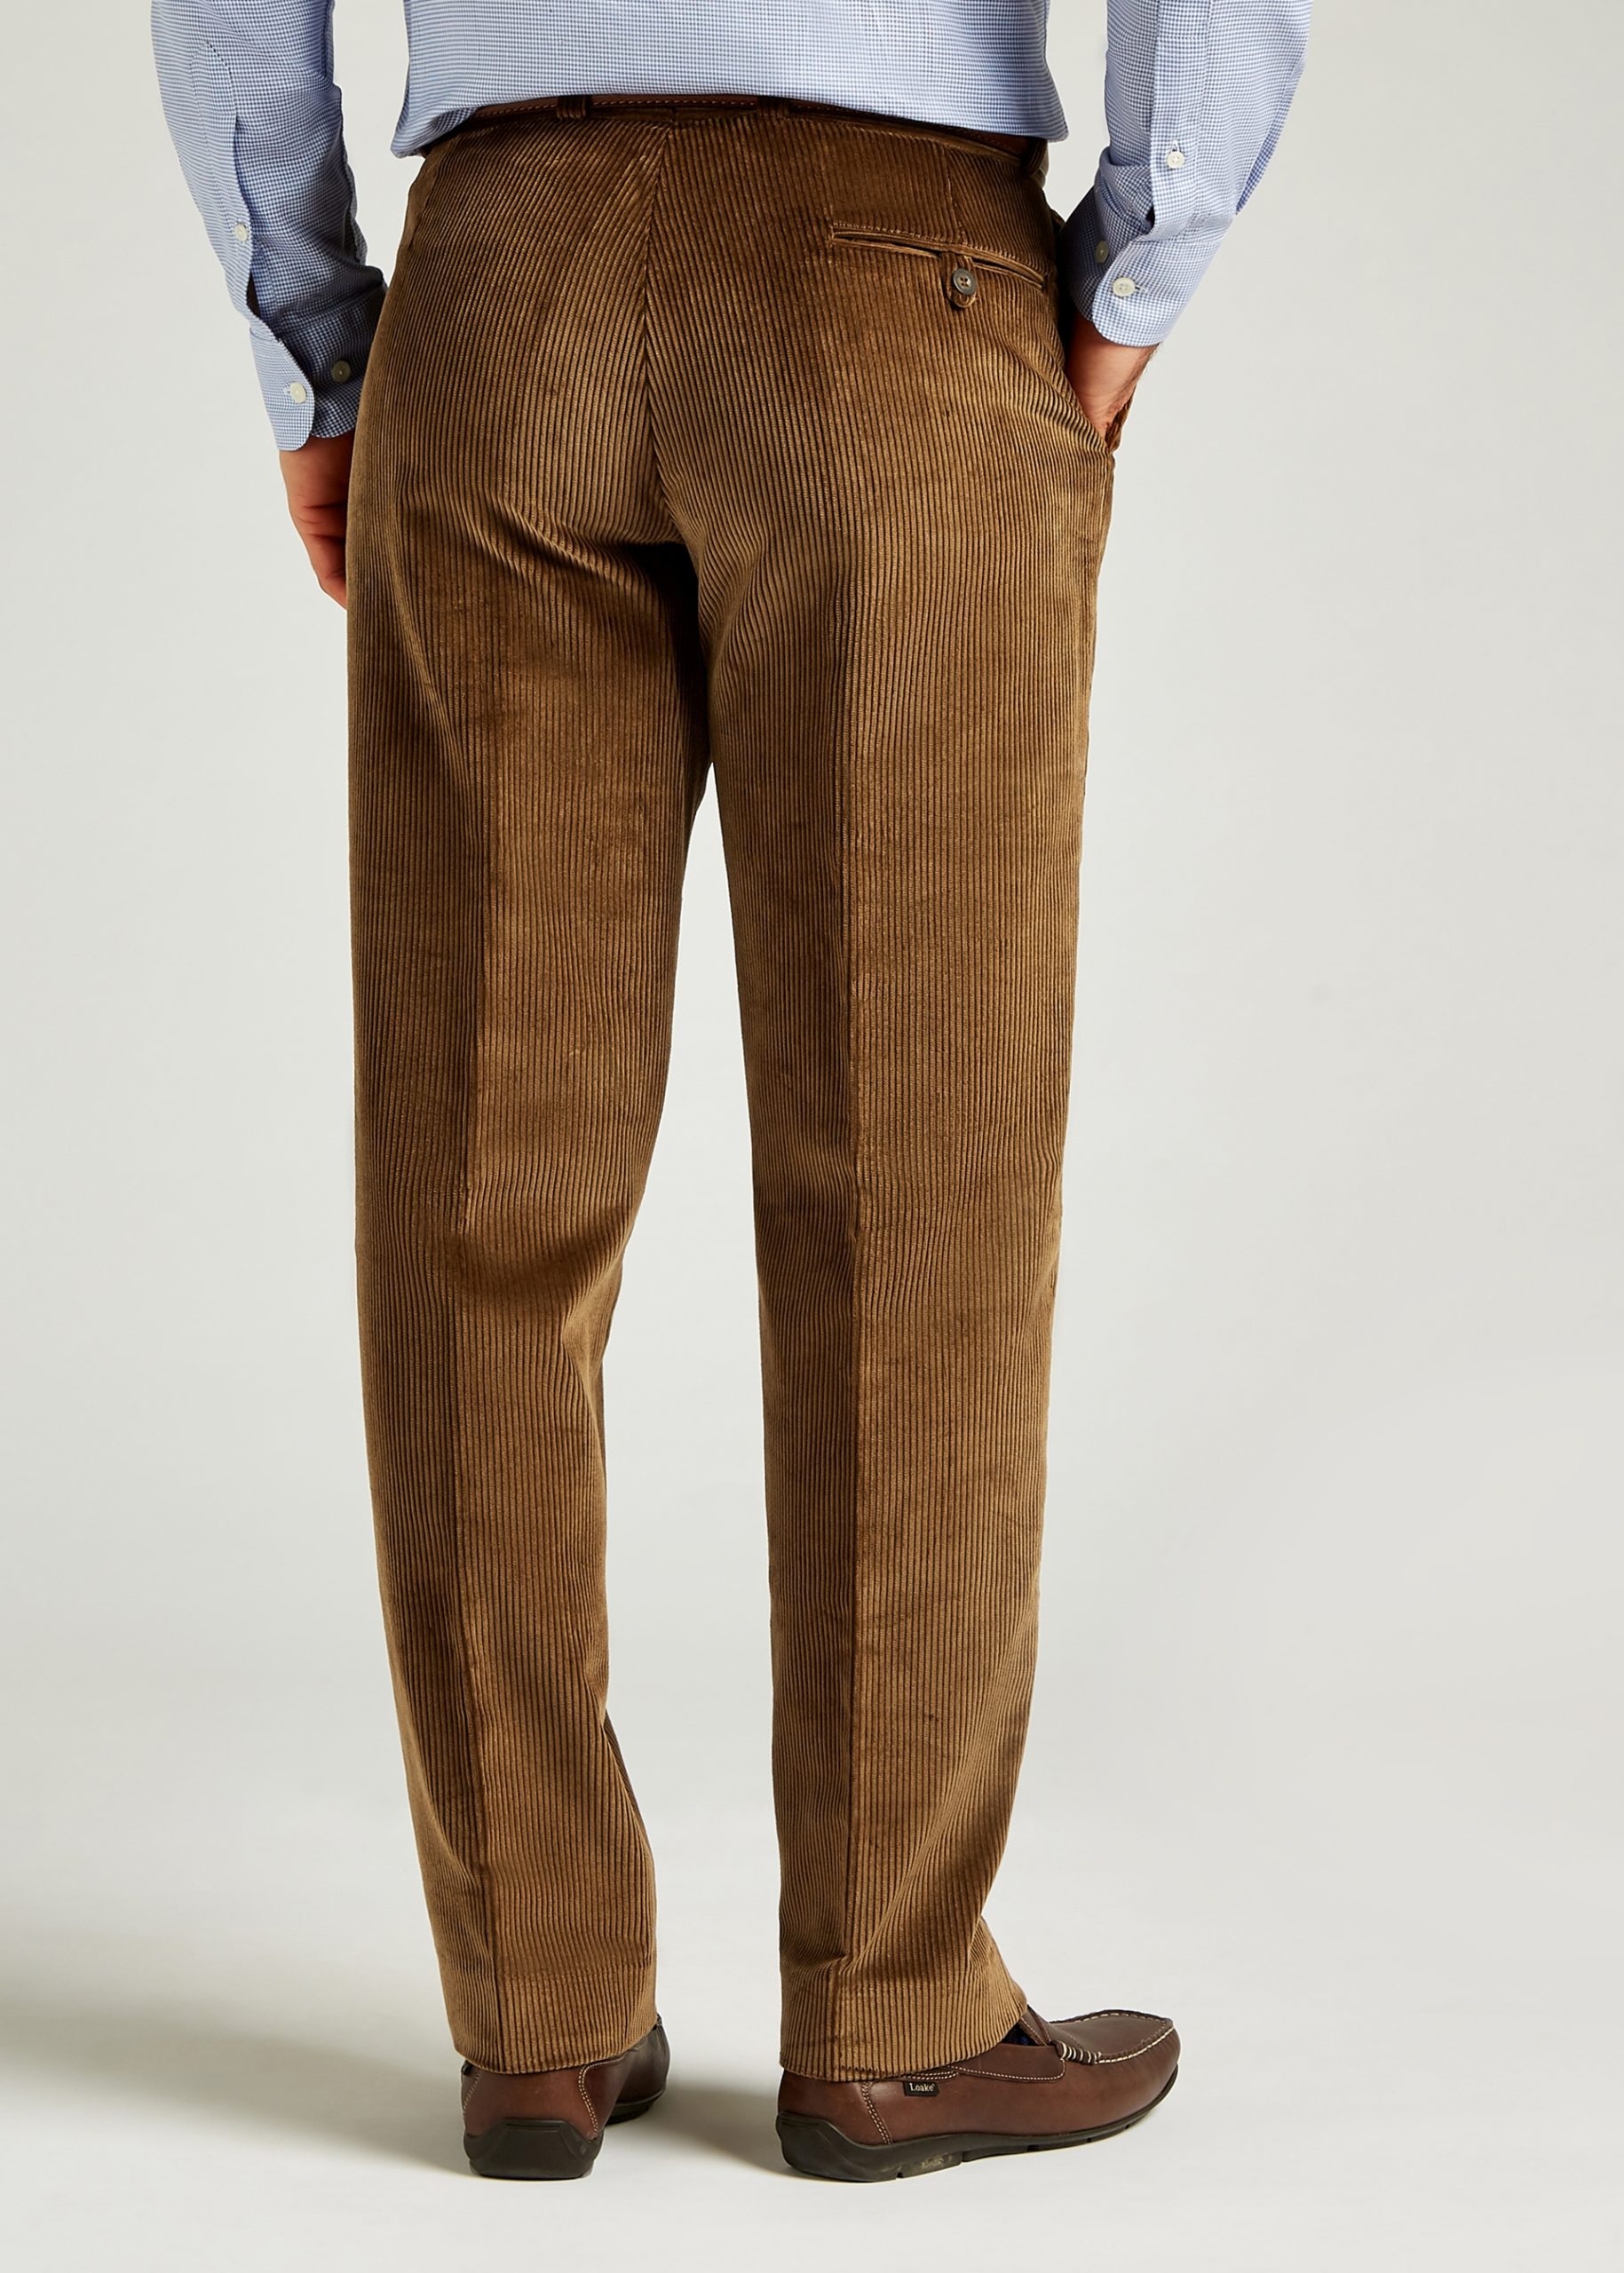 Tan corduroy trousers styled with blue shirt and brown leather belt